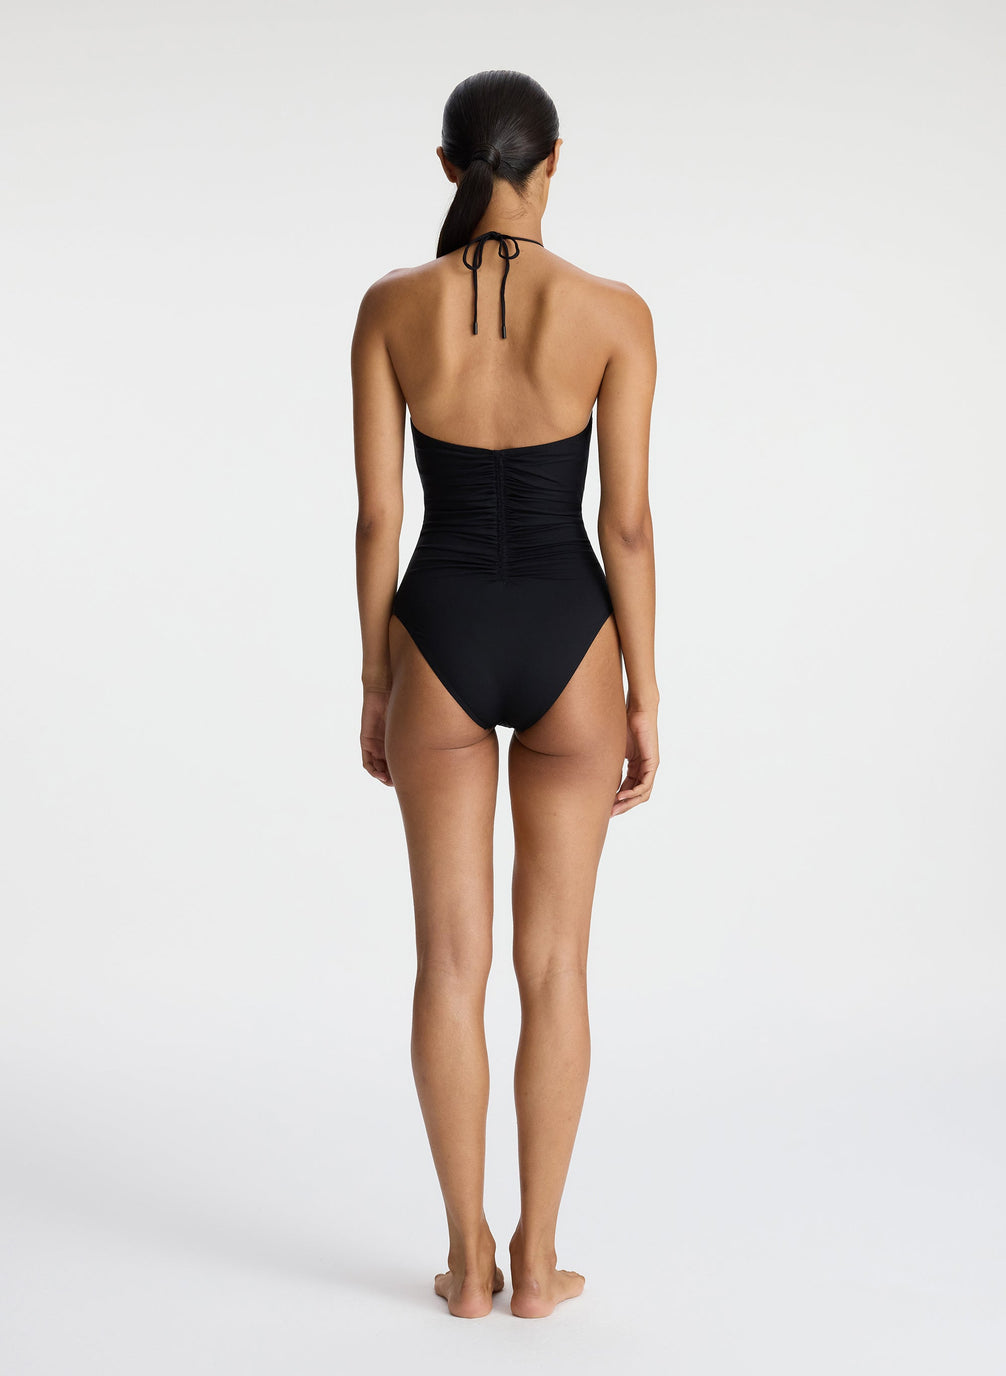 back view of woman wearing black halter one piece swimsuit